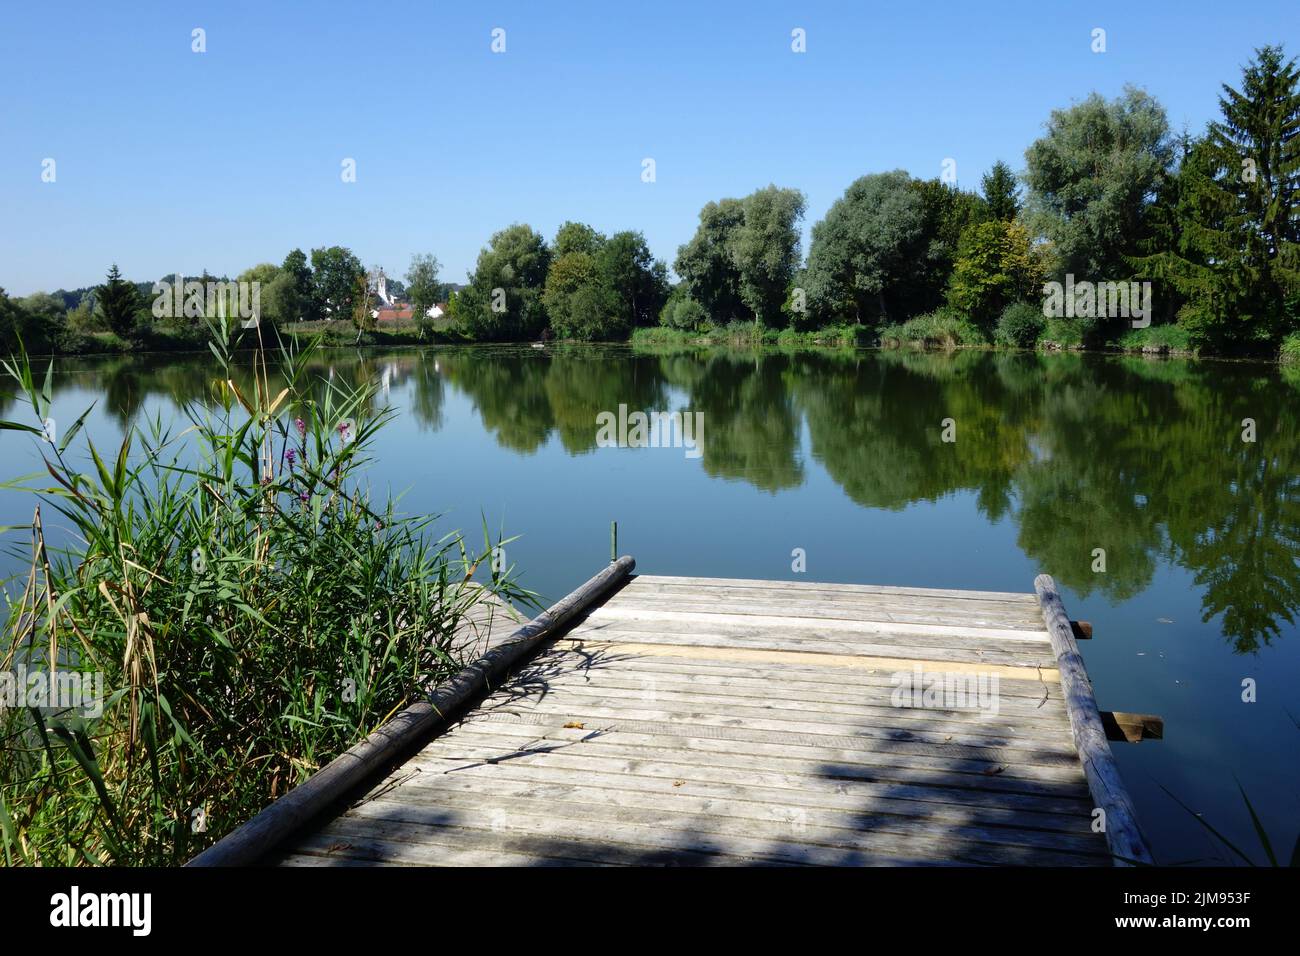 Pond with bathing jetty Stock Photo